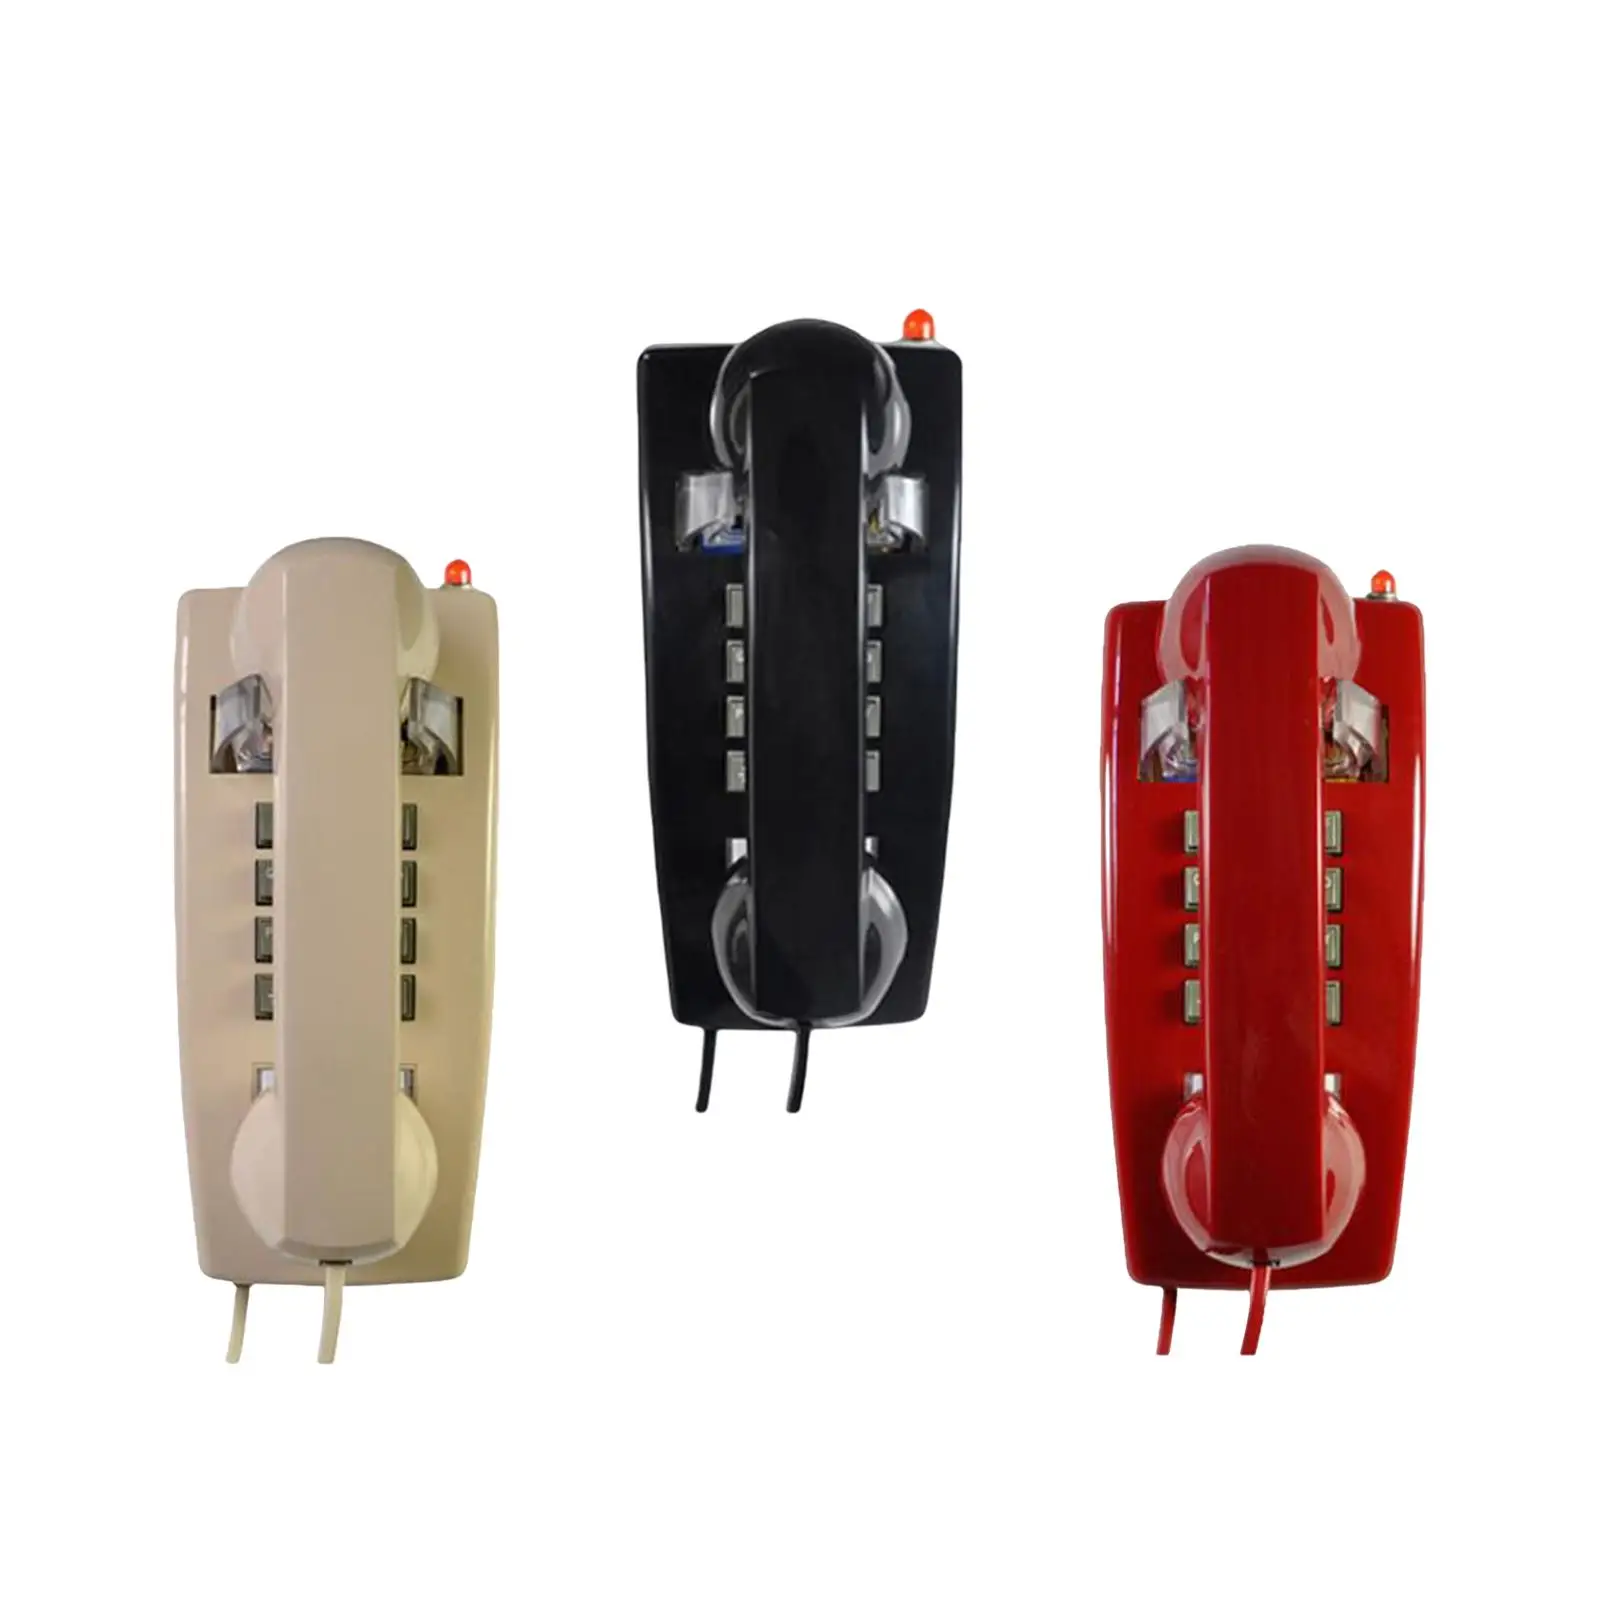 Retro Wall Phone Corded Wall Phone Wall Telephone Corded Telephone Old Style Phone for garage Room Airport Home School